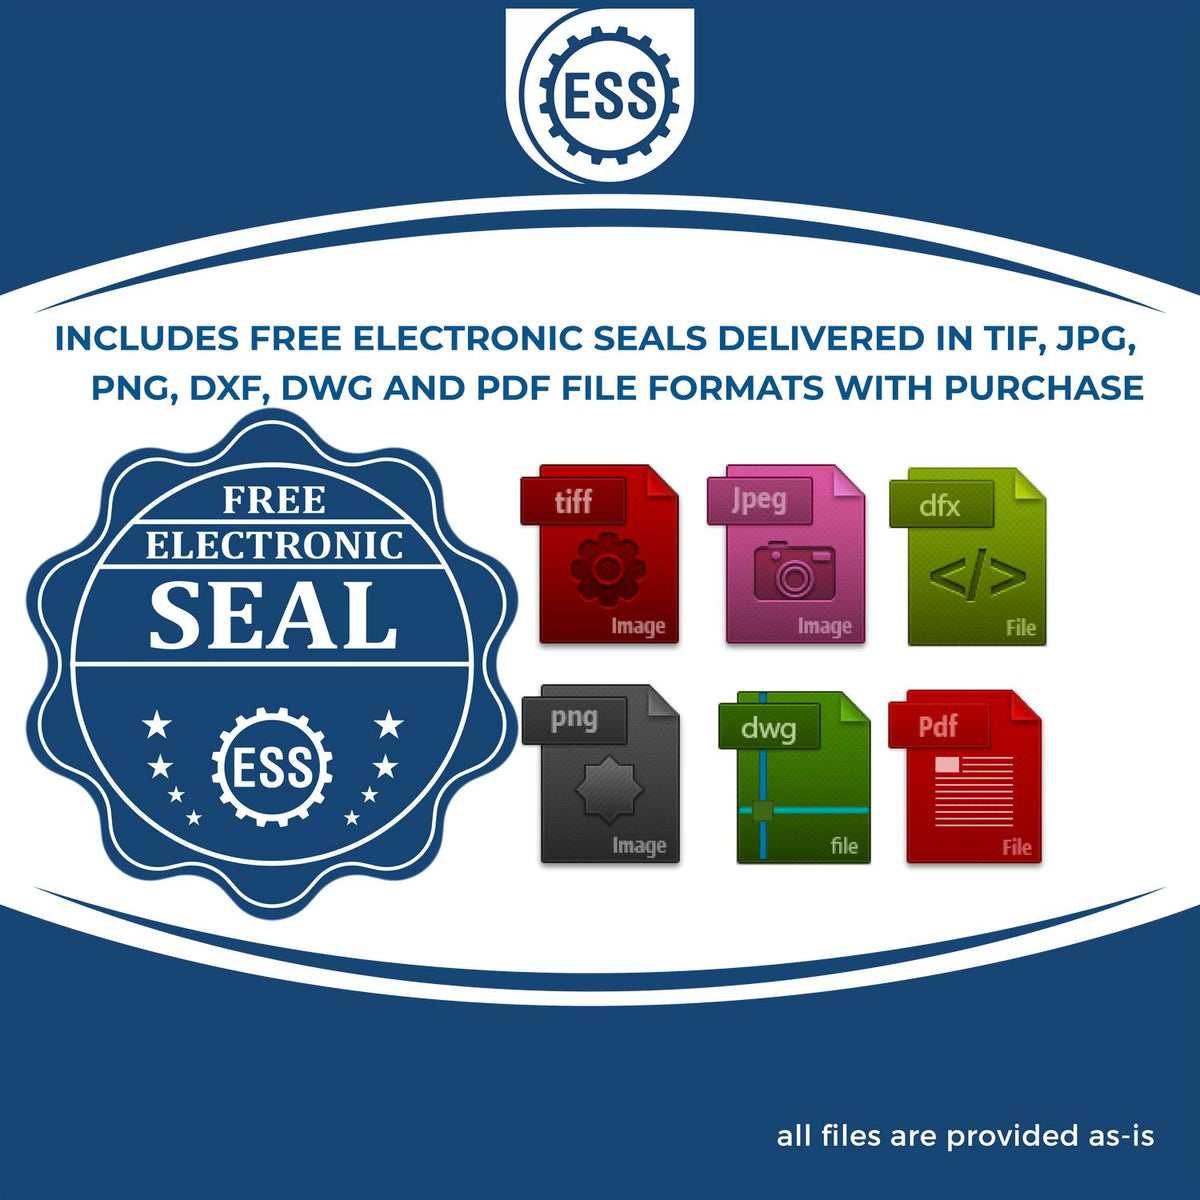 An infographic for the free electronic seal for the Indiana Professional Engineer Seal Stamp illustrating the different file type icons such as DXF, DWG, TIF, JPG and PNG.